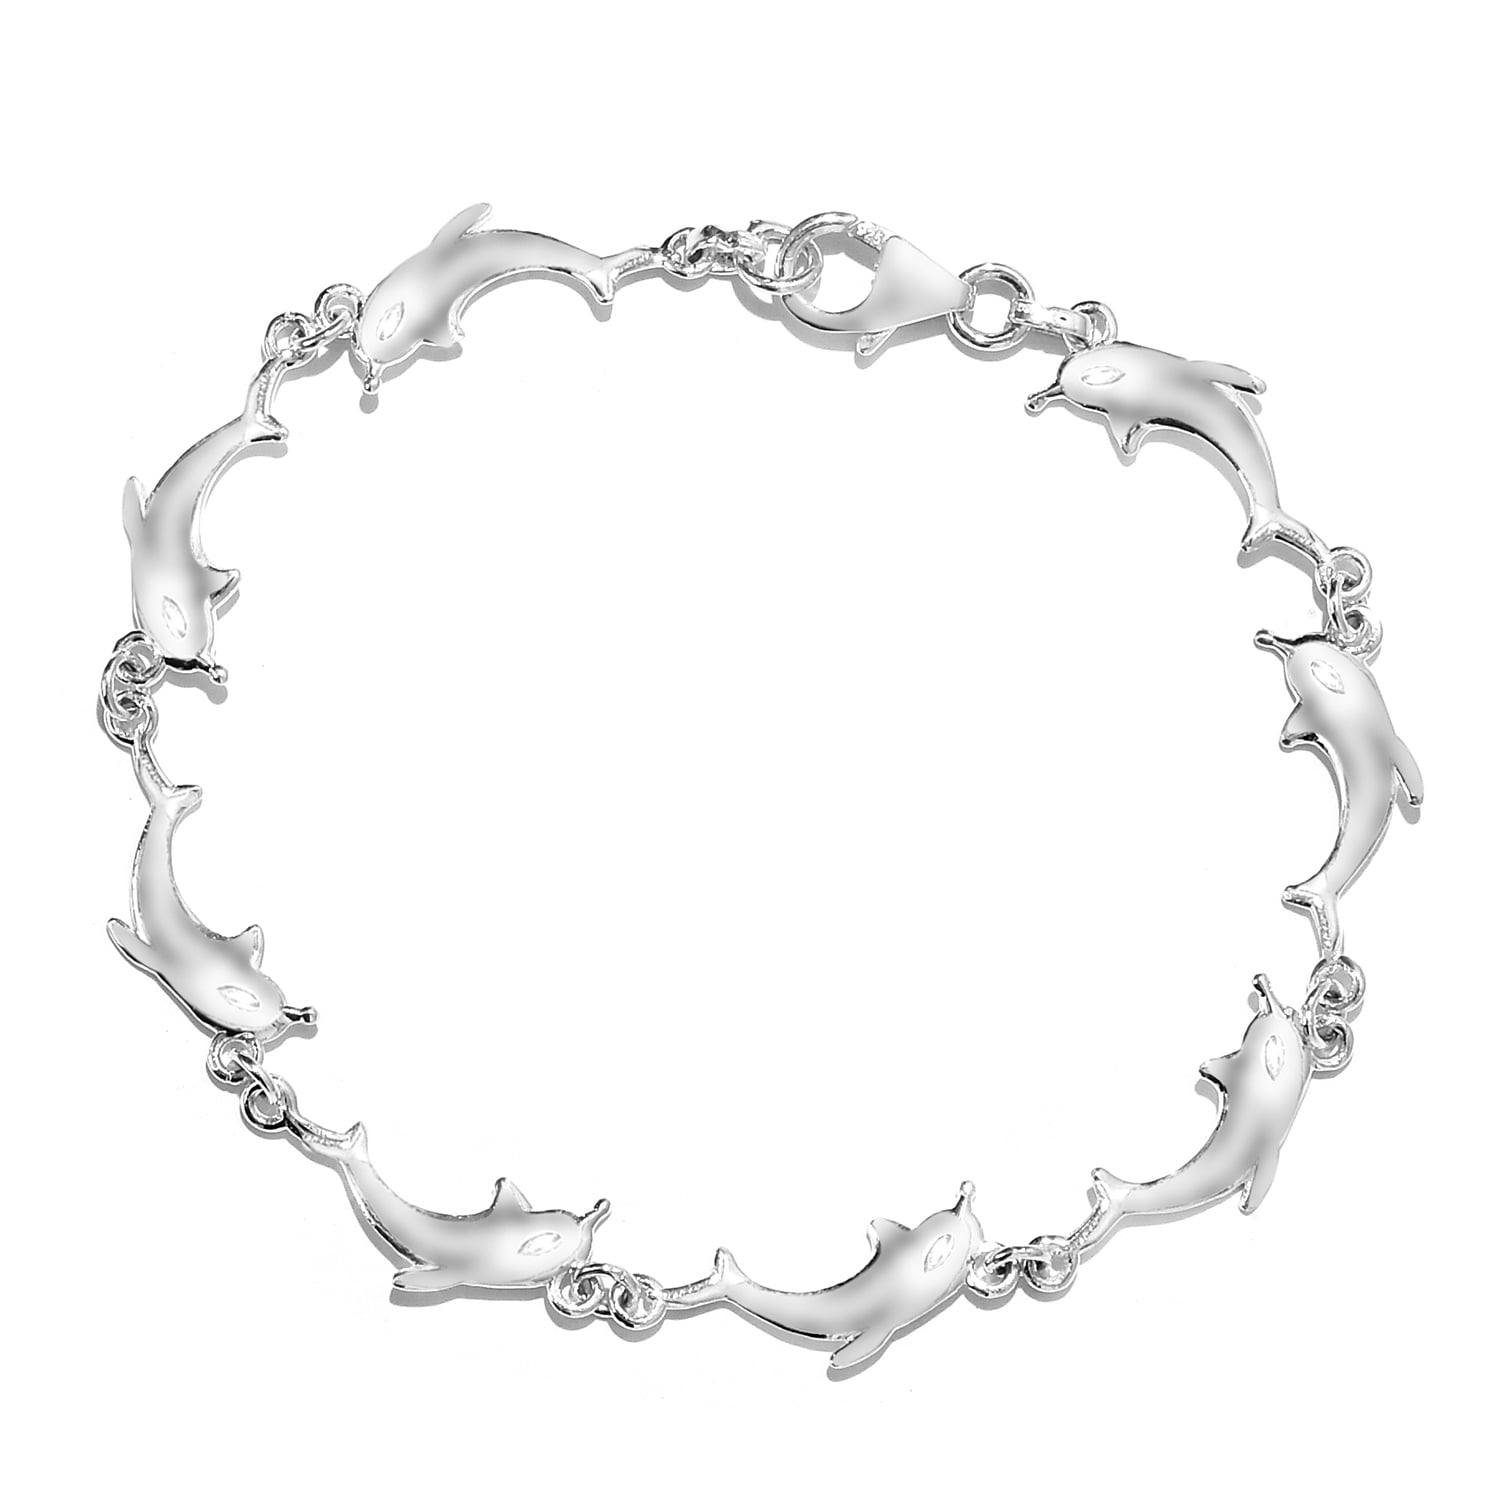 Shop LC - Dolphin Link Bracelet 925 Sterling Silver Fashion Jewelry ...